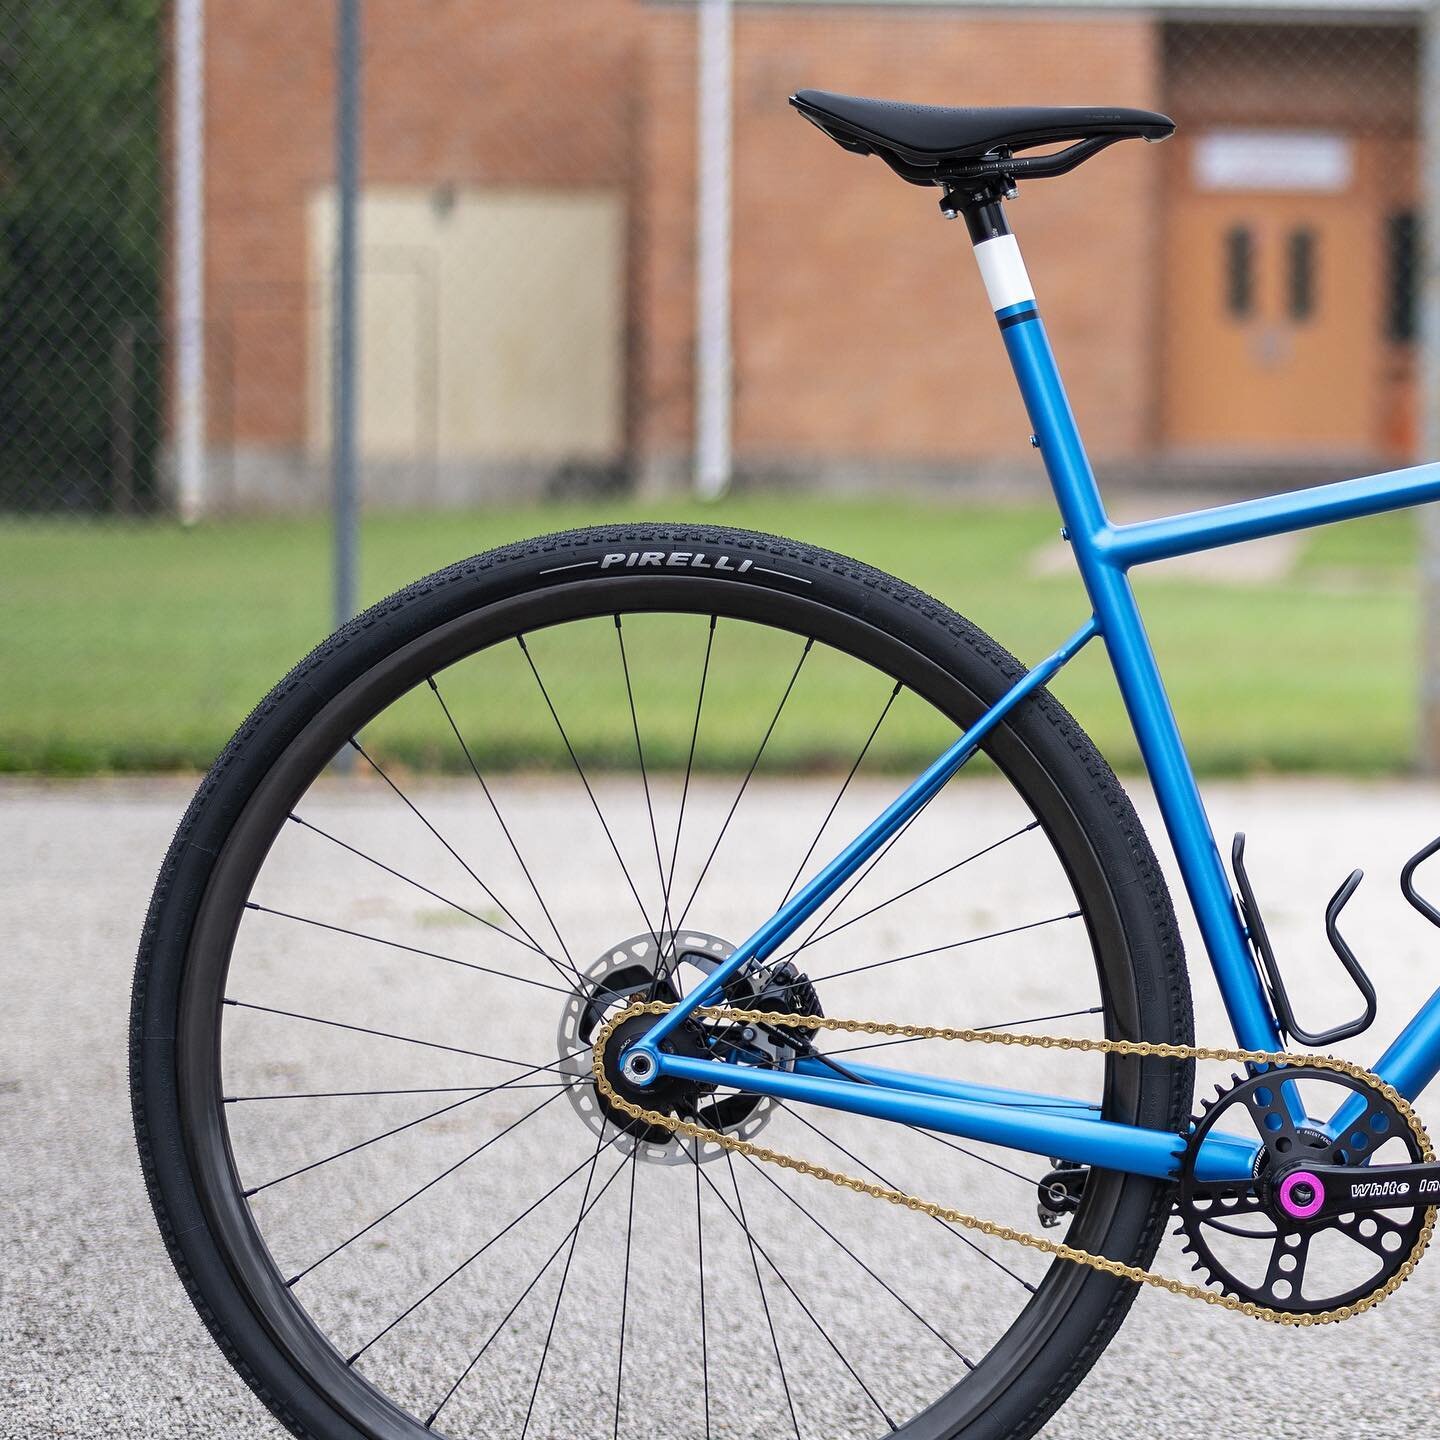 &ldquo;It&rsquo;s the details, like a rear thru-axle that unthreads so easily because the frame is absolutely straight. It&rsquo;s the impossibly thin seat stays, and uber clean brazes. It&rsquo;s the ability to ask for an extra bottle mount on the r